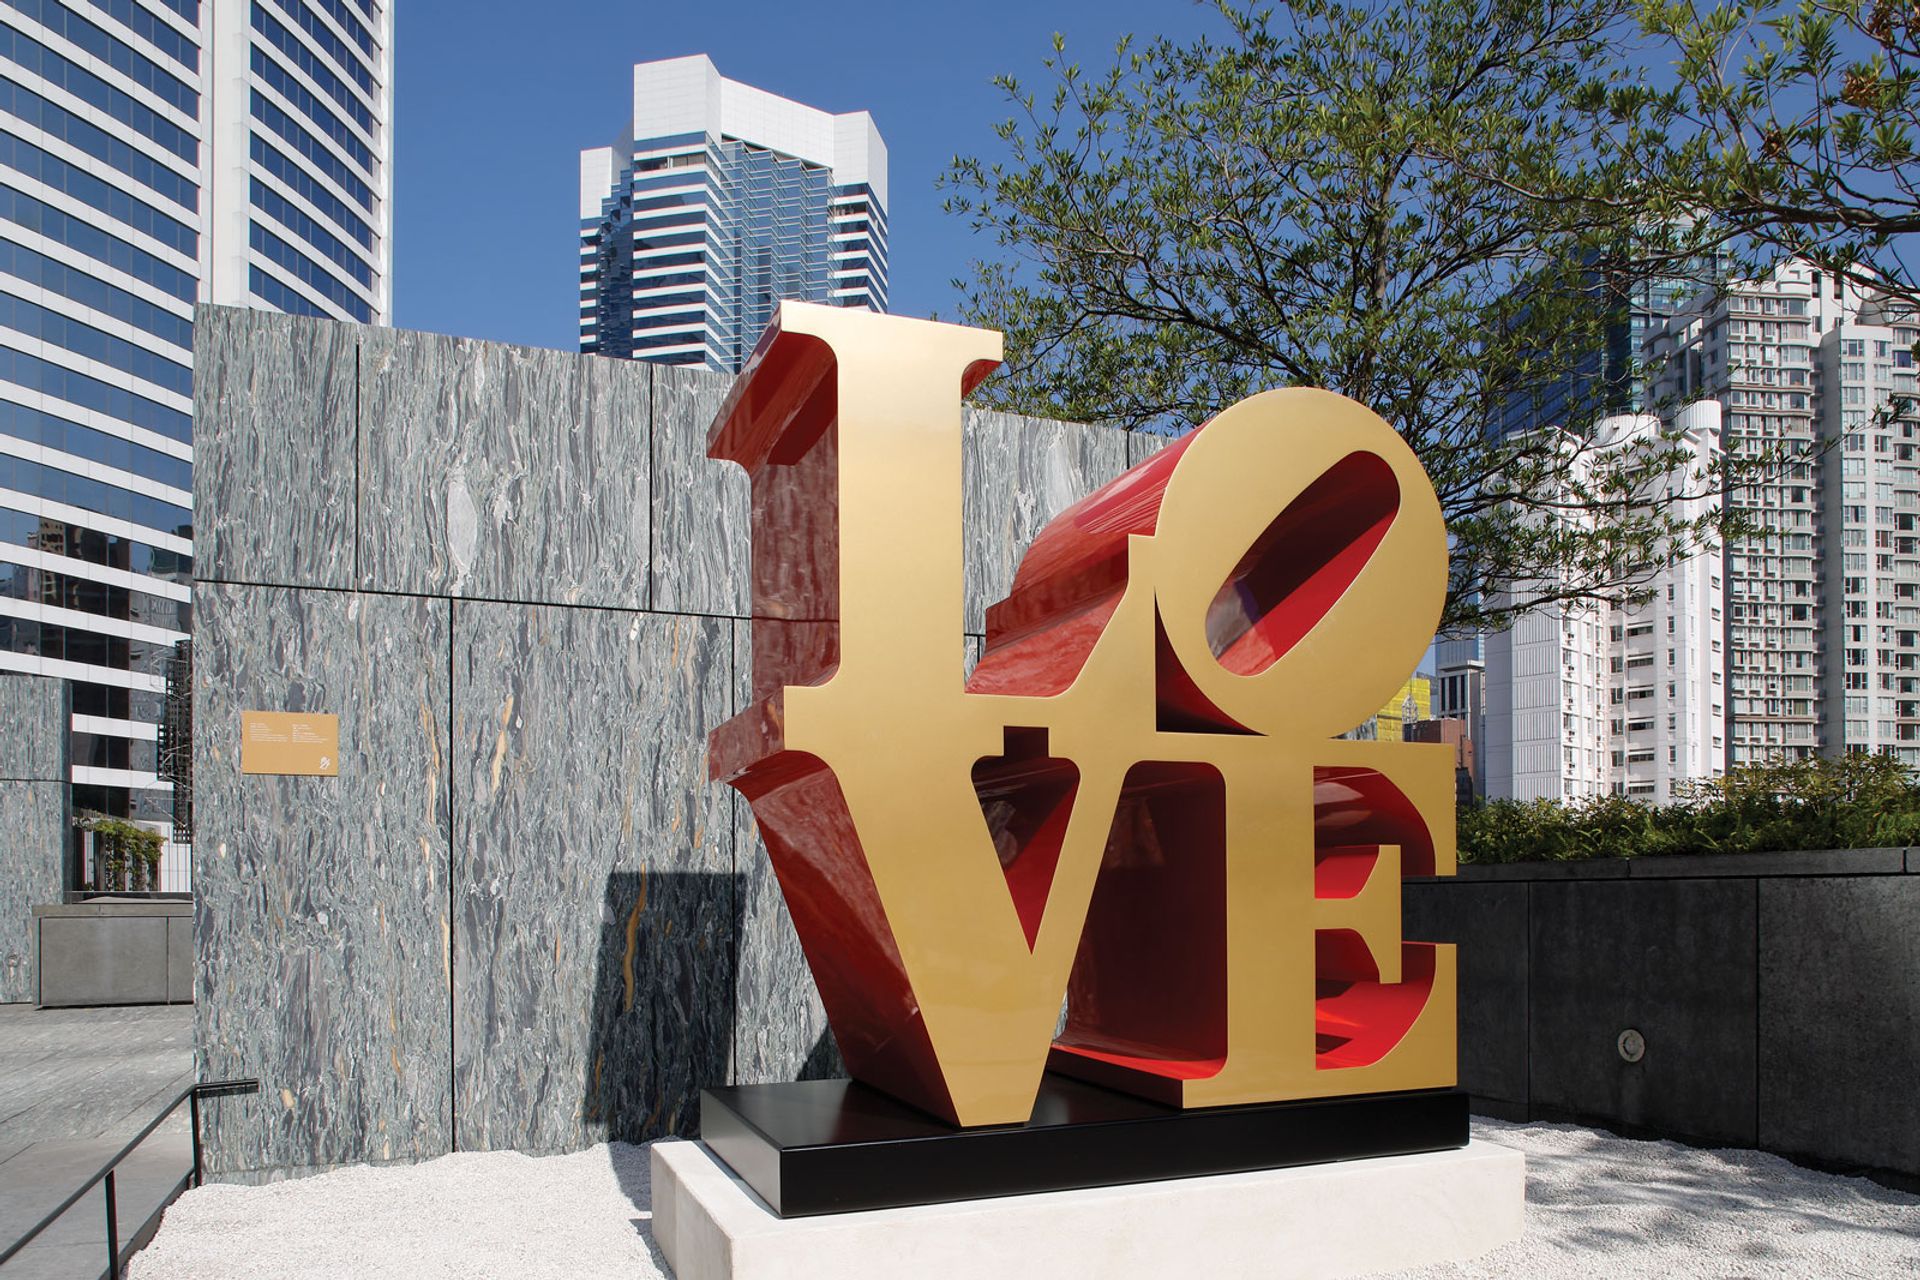 True love: Indiana’s original sculpture, which spawned countless imitations Morgan Art Foundation/Artists Rights Society (ARS); Photo: John Nye